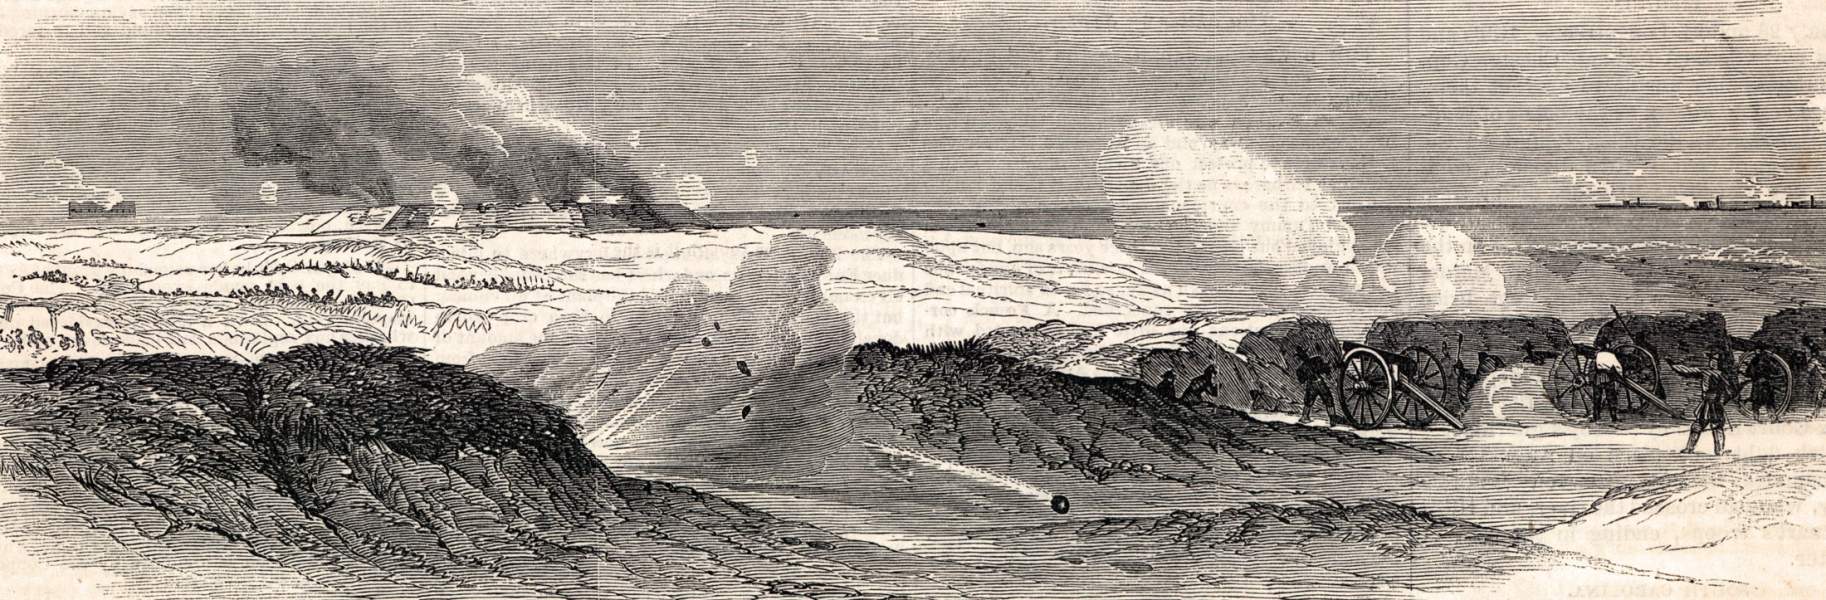 Shelling of Fort Wagner, Morrris Island, South Carolina, July 24-25, 1863, artist's impression, zoomable image